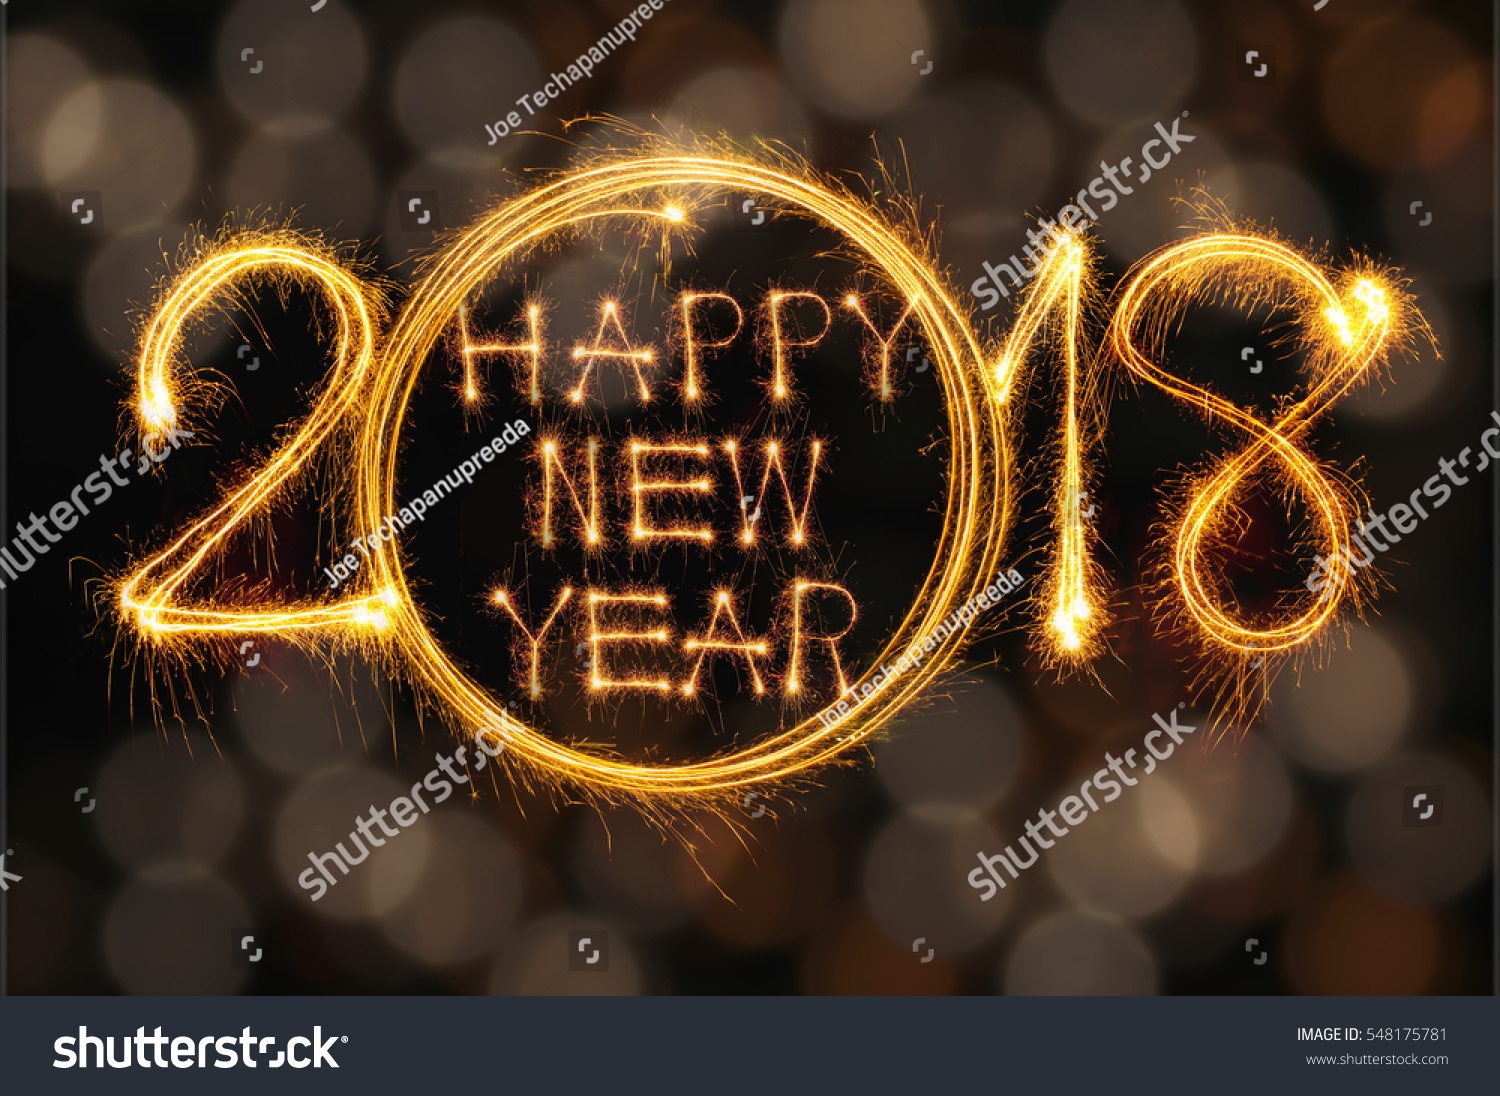 Happy new year 2018 text written with Sparkle fireworks isolated on black background #548175781